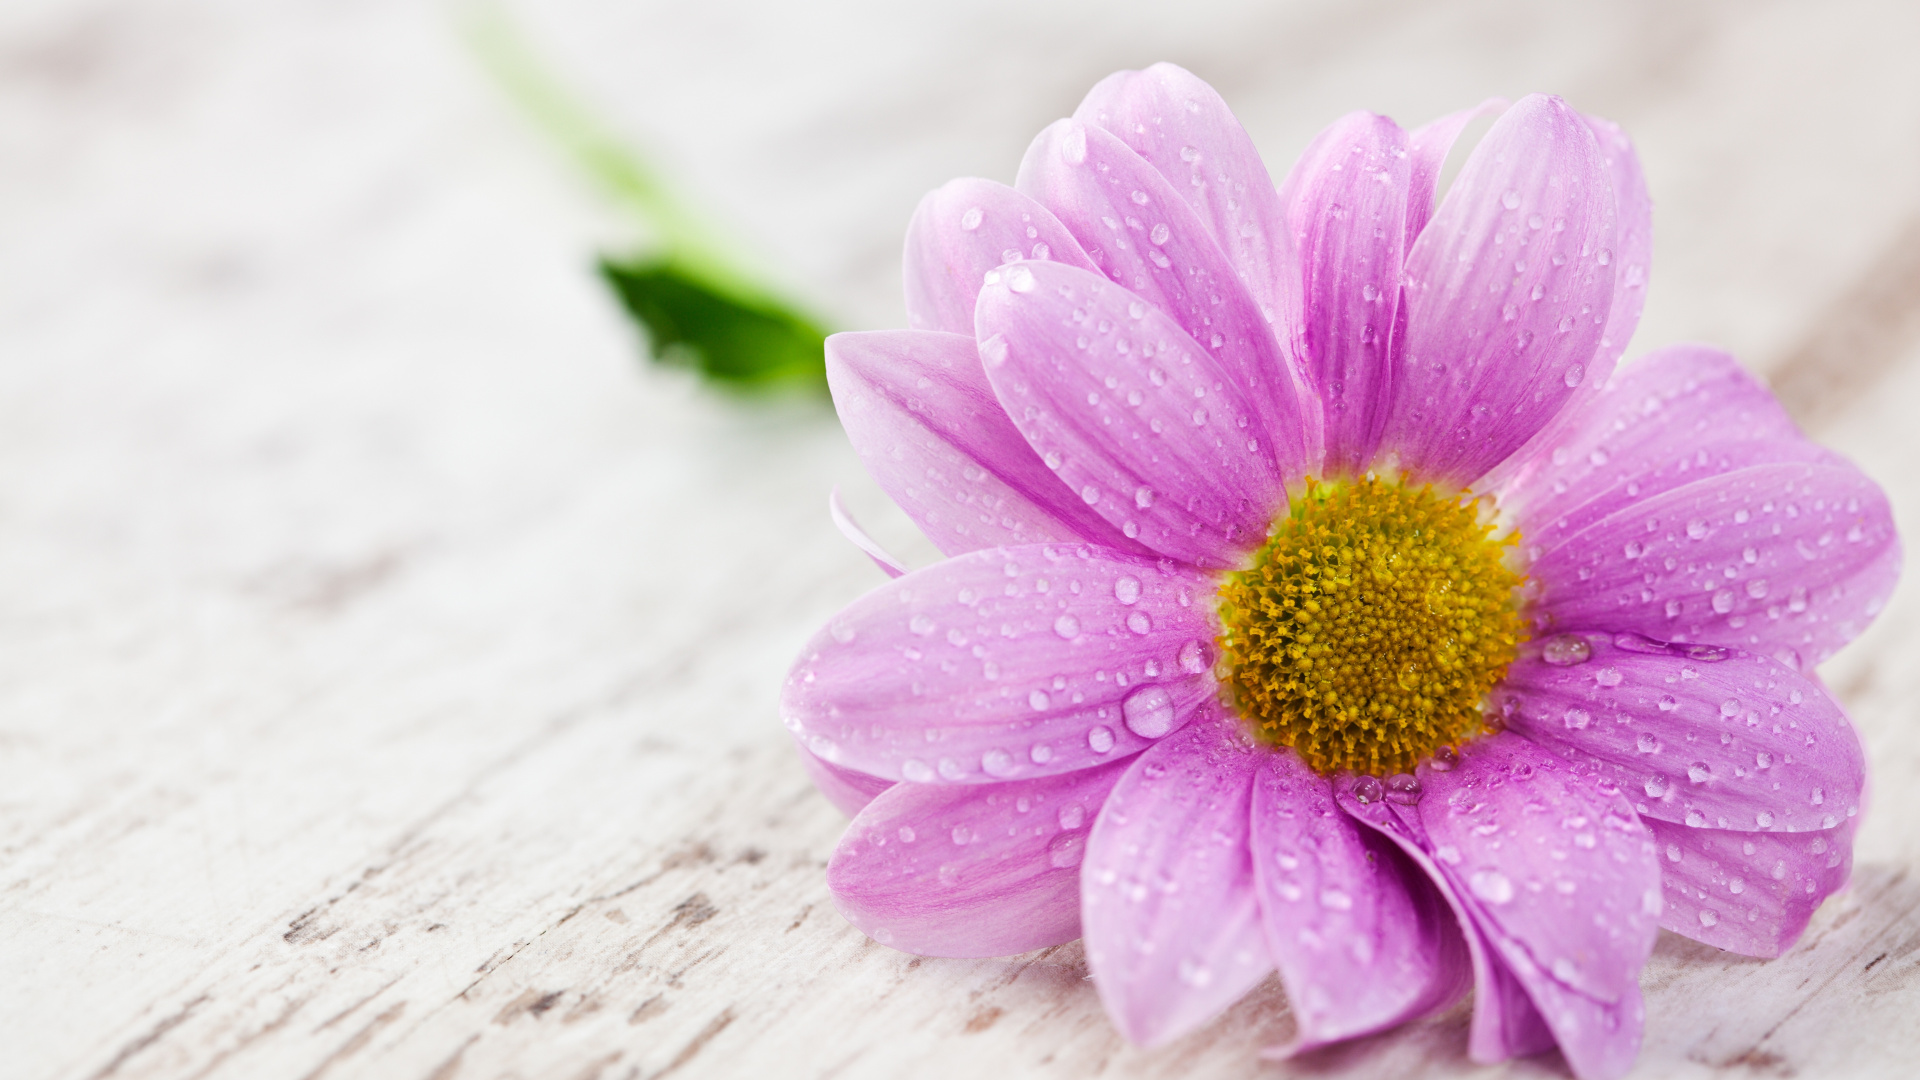 Pink Flower on White Surface. Wallpaper in 1920x1080 Resolution